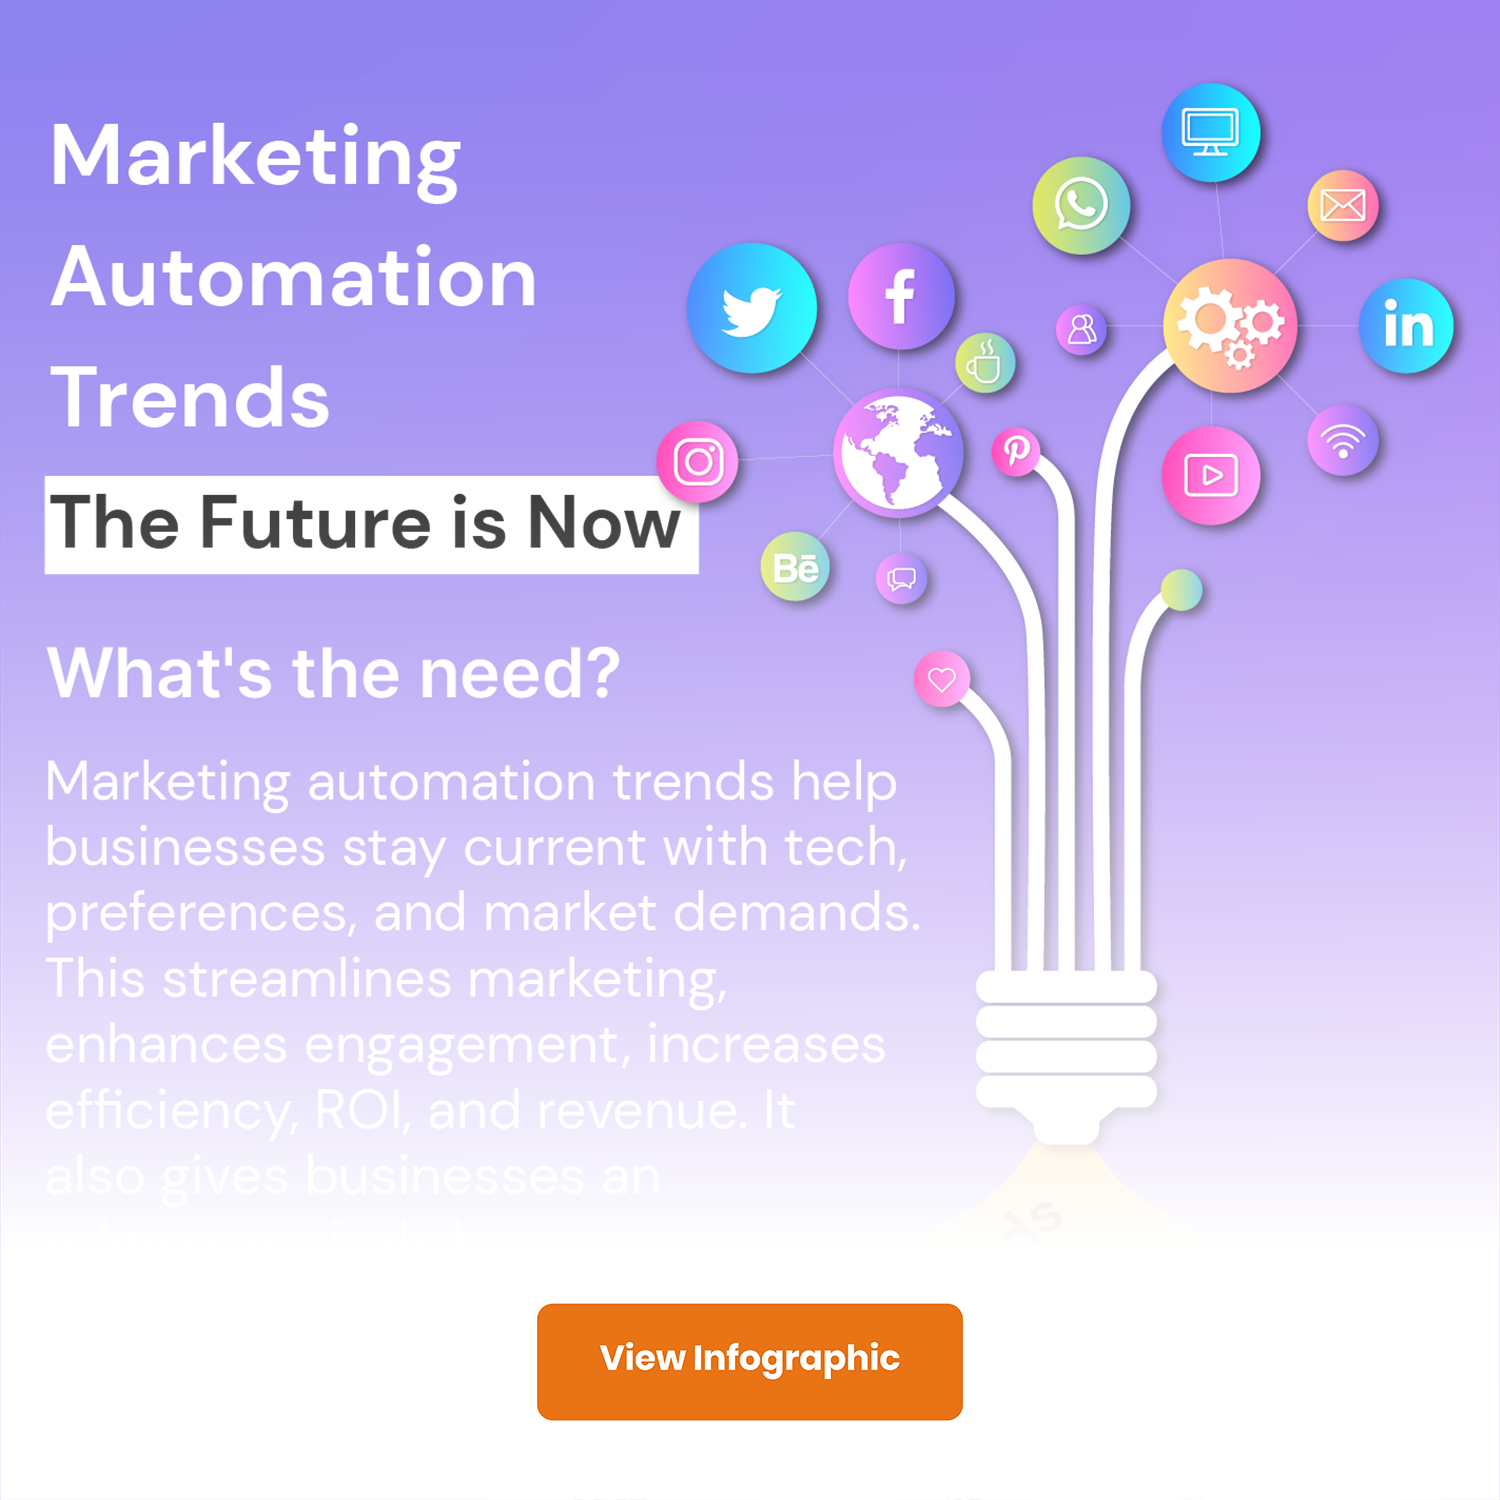 Ecommerce Marketing Automation to Sell More Faster